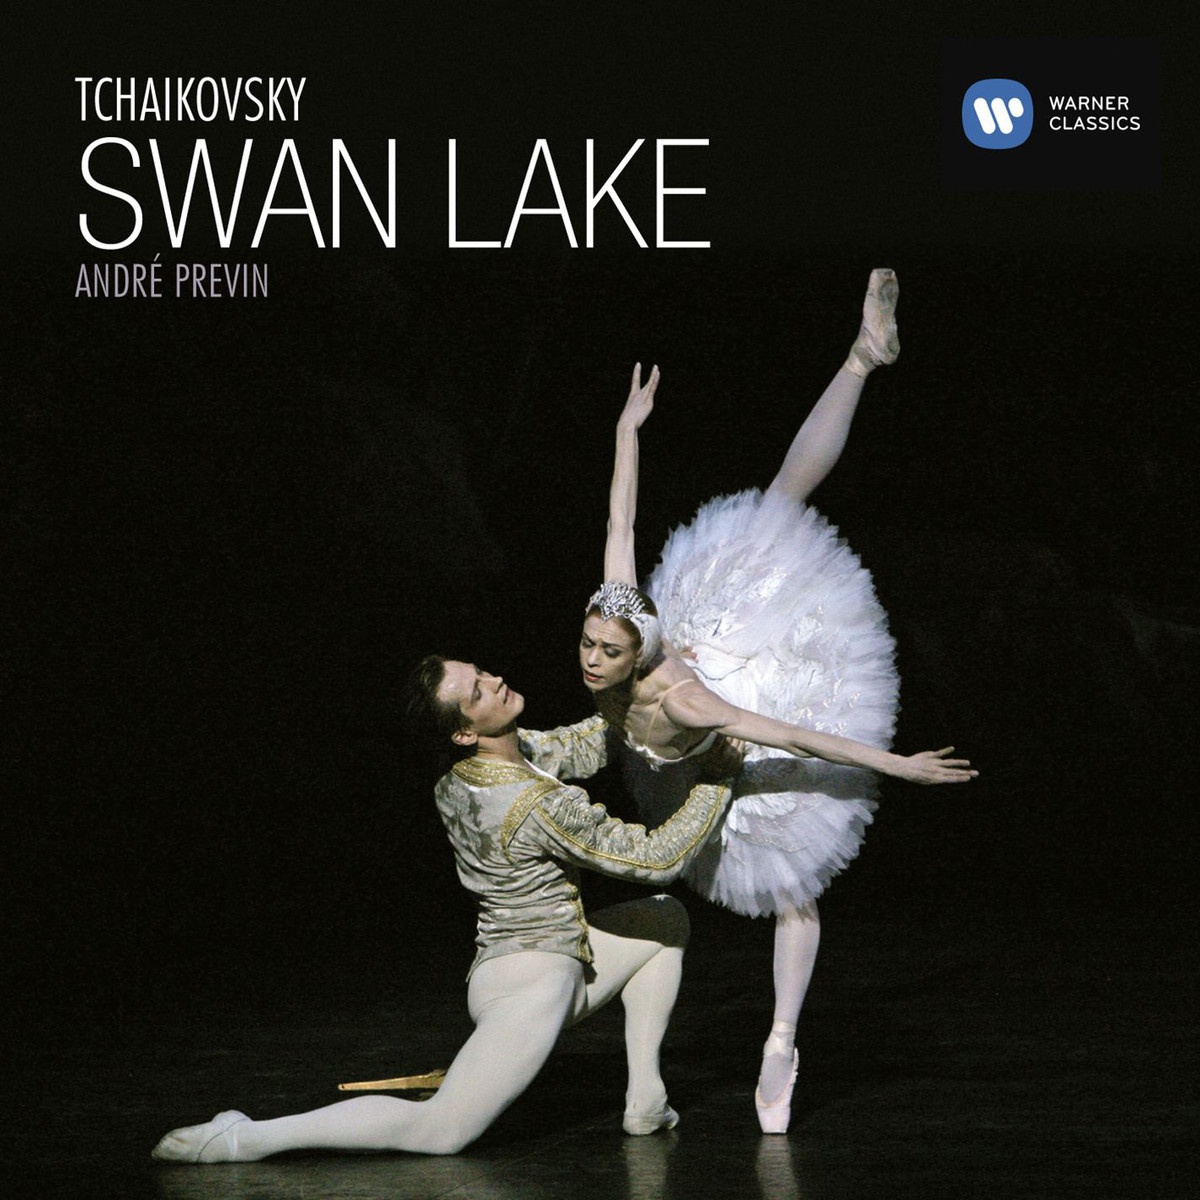 Swan Lake - Ballet in four acts Op. 20, Act I: 6. Pas d'action (Andantino quasi moderato - Allegro)